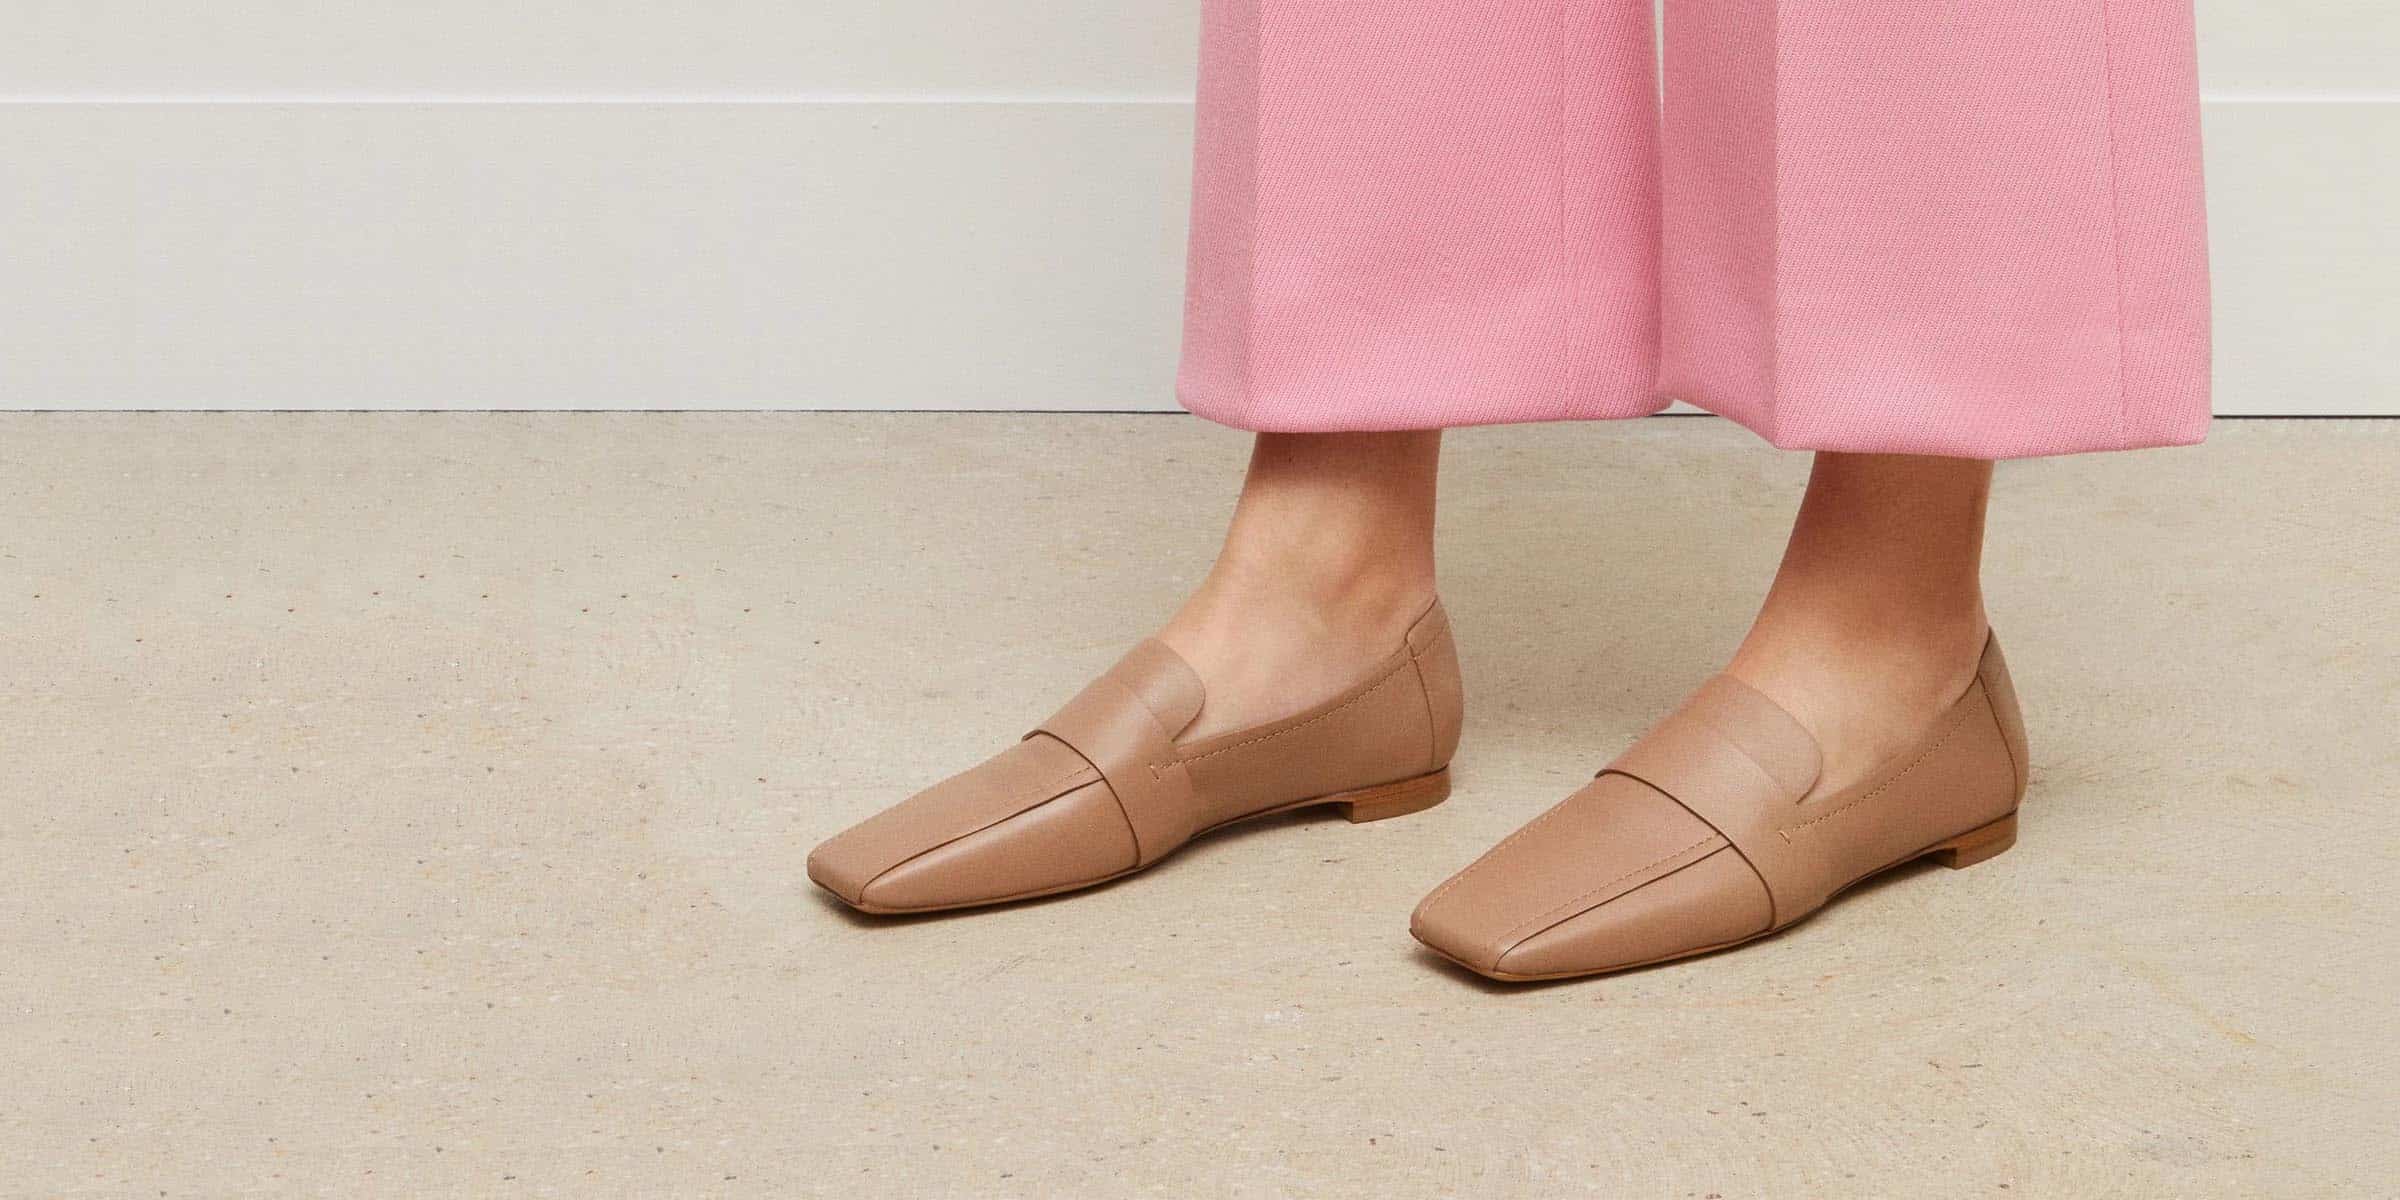 Square toe Havaianas are the cool girl shoes of summer 2023